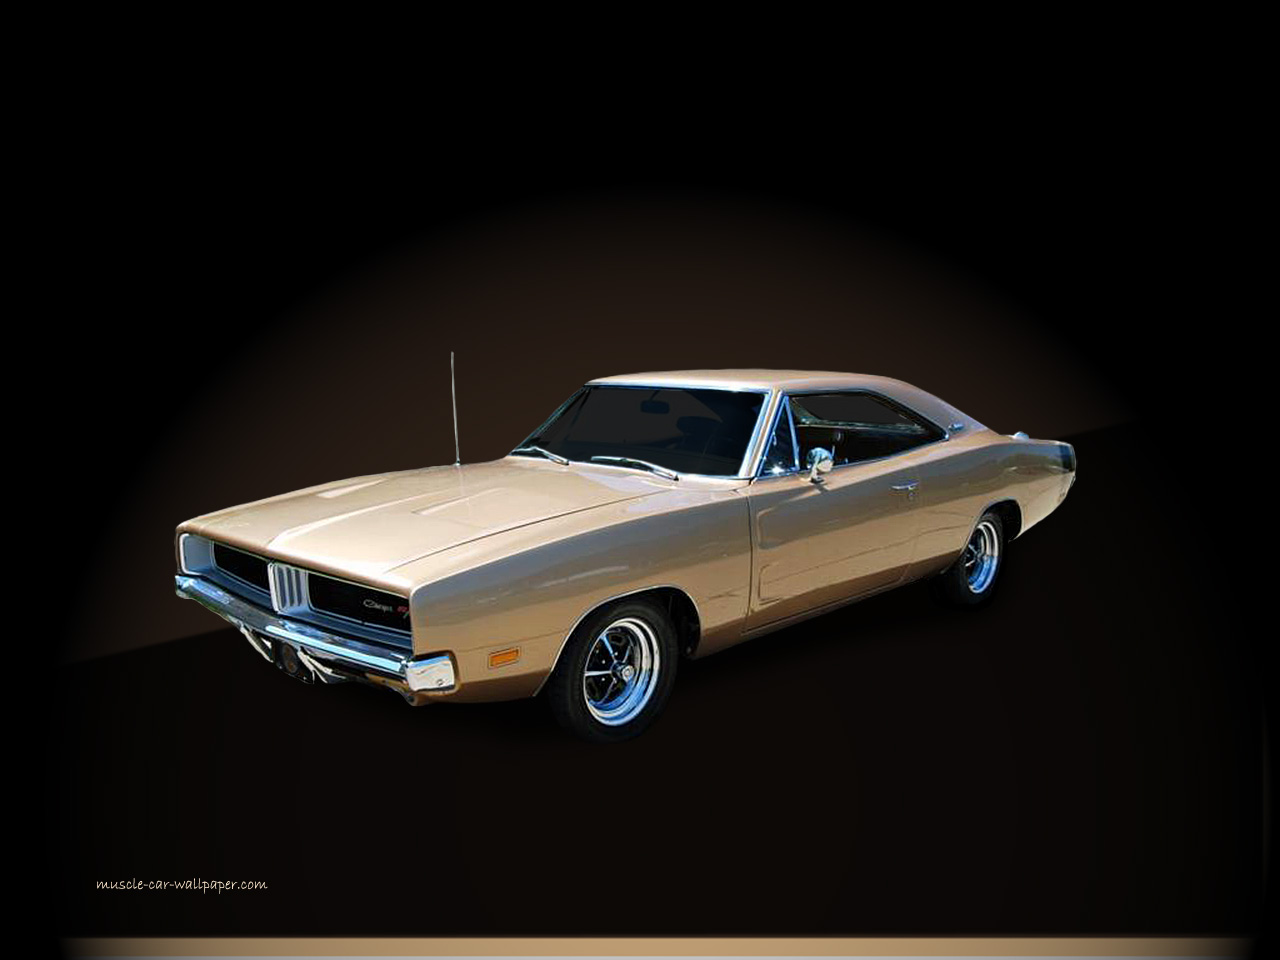 1969 Dodge Charger Rt Wallpaper 1969 Dodge Charger RT Gold